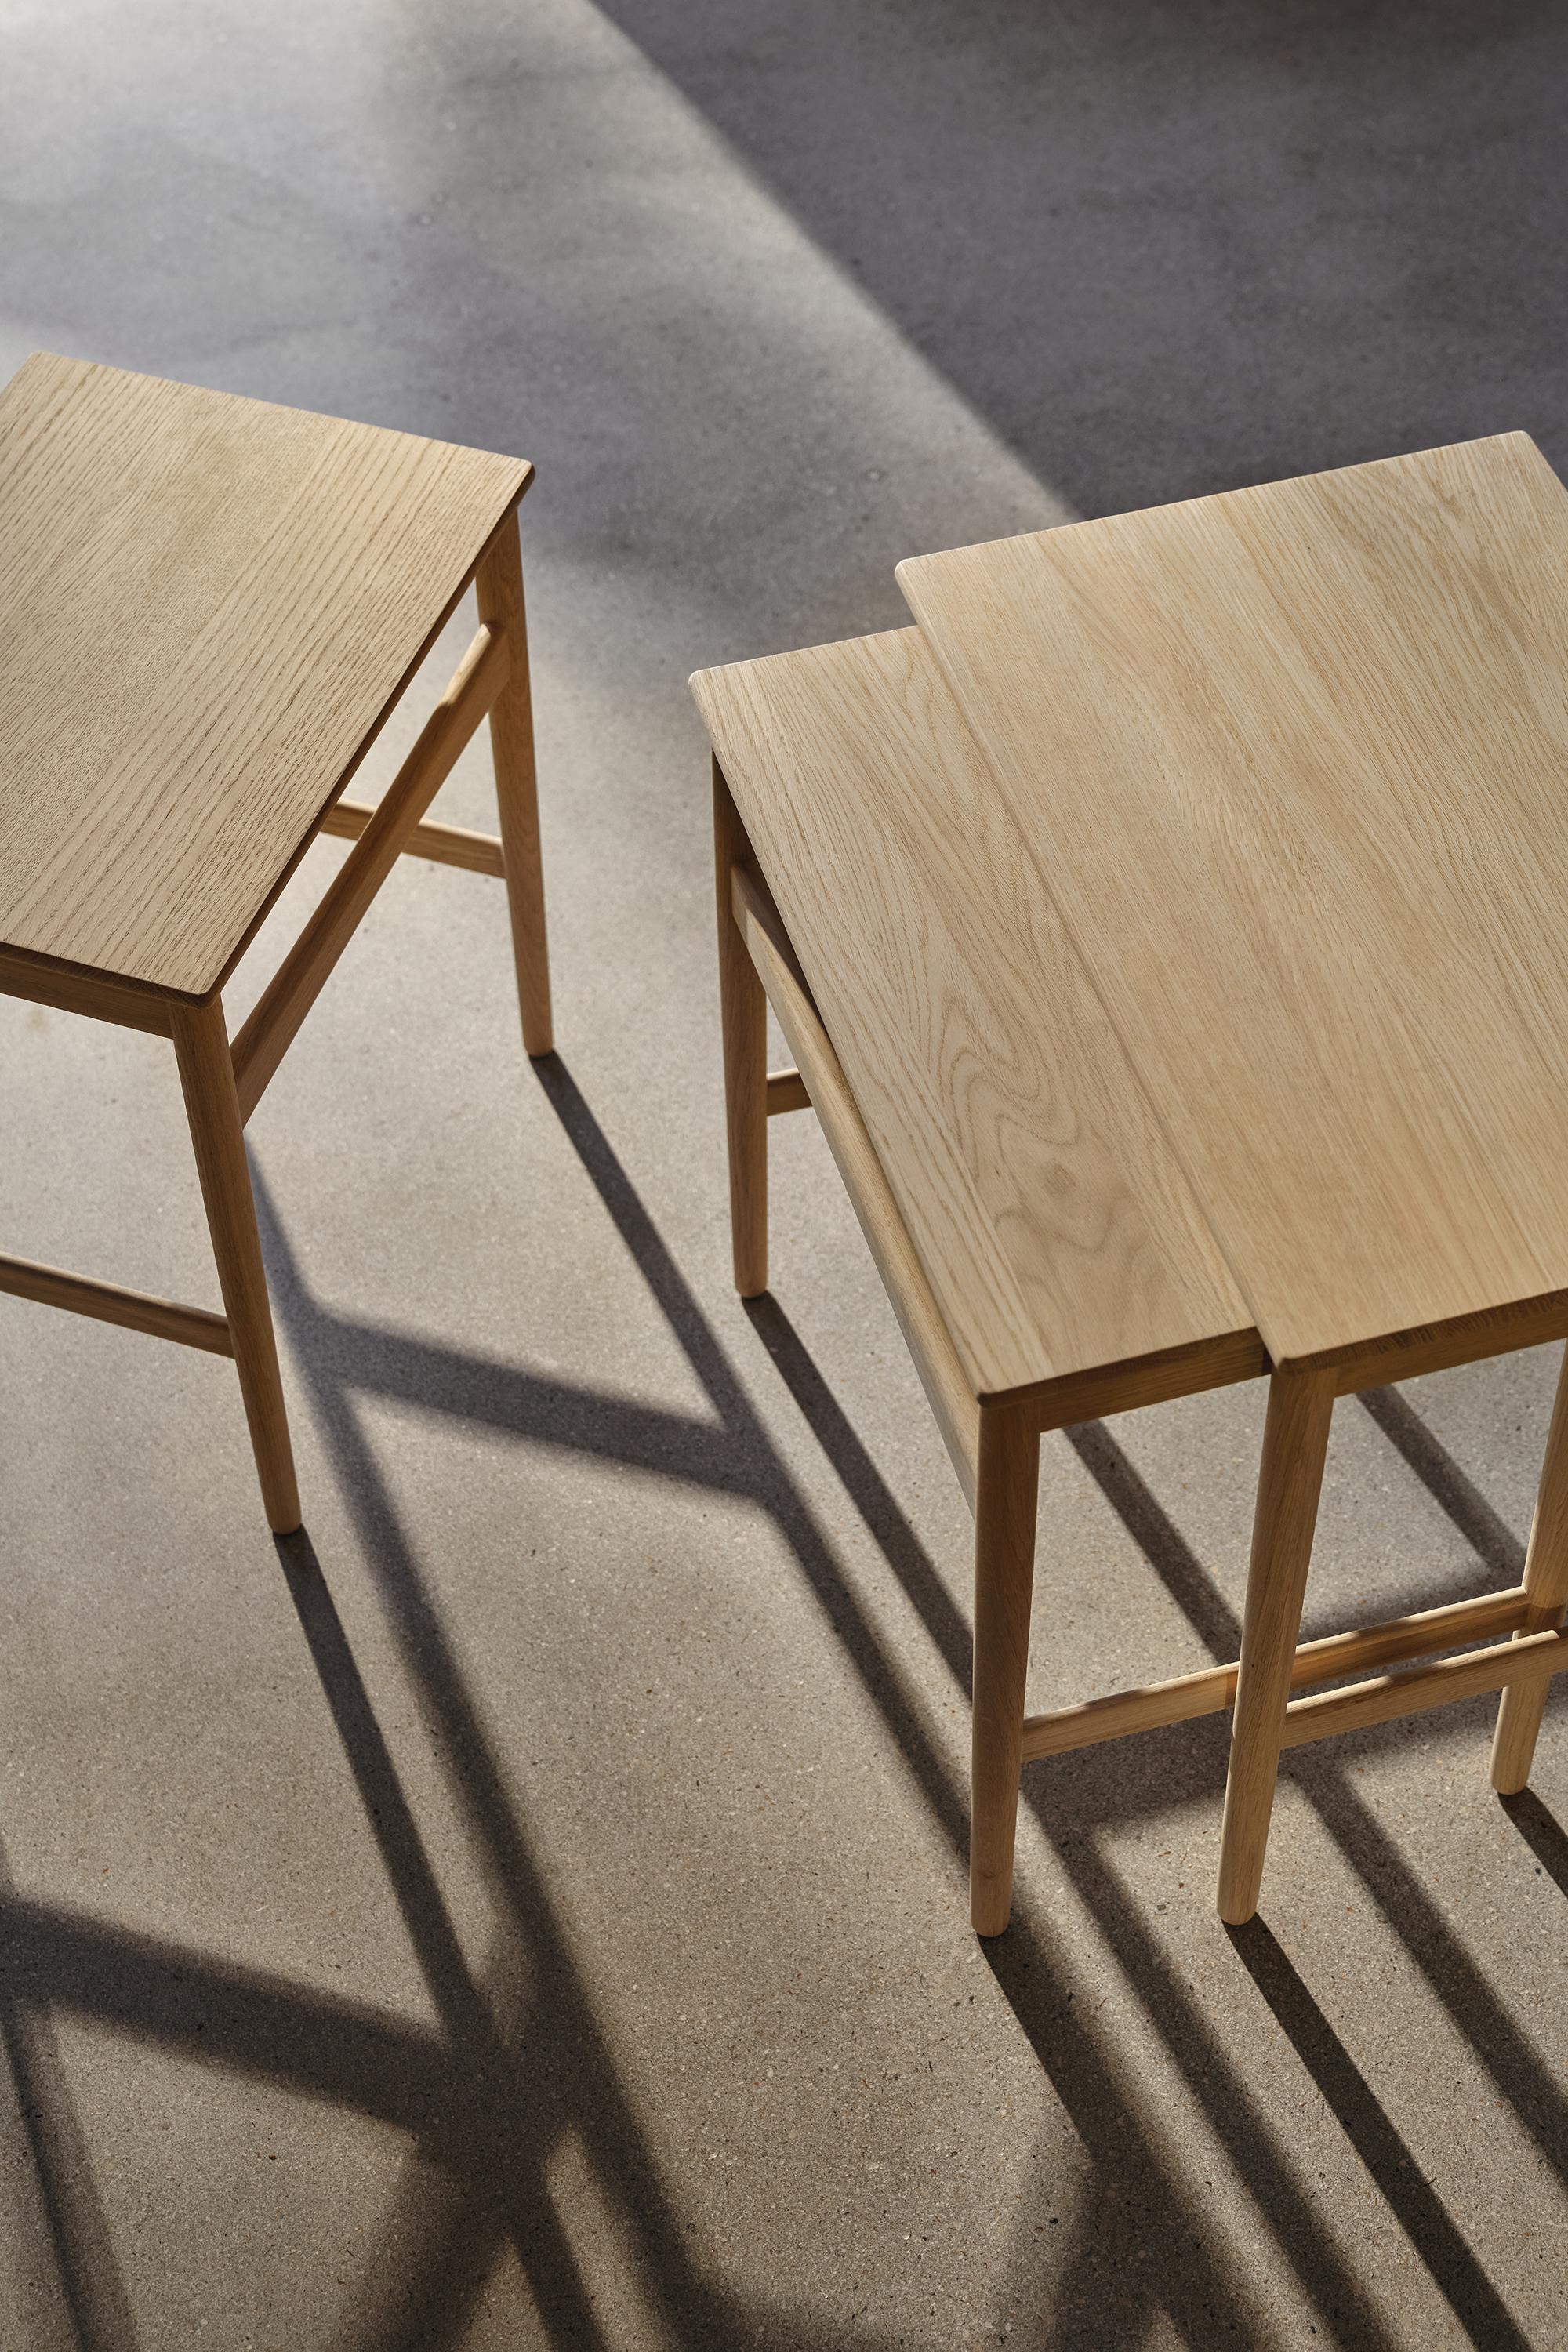 Hans J. Wegner 'CH004' Nesting Tables in Oak White Oil for Carl Hansen & Son.

The story of Danish Modern begins in 1908 when Carl Hansen opened his first workshop. His firm commitment to beauty, comfort, refinement, and craftsmanship is evident in